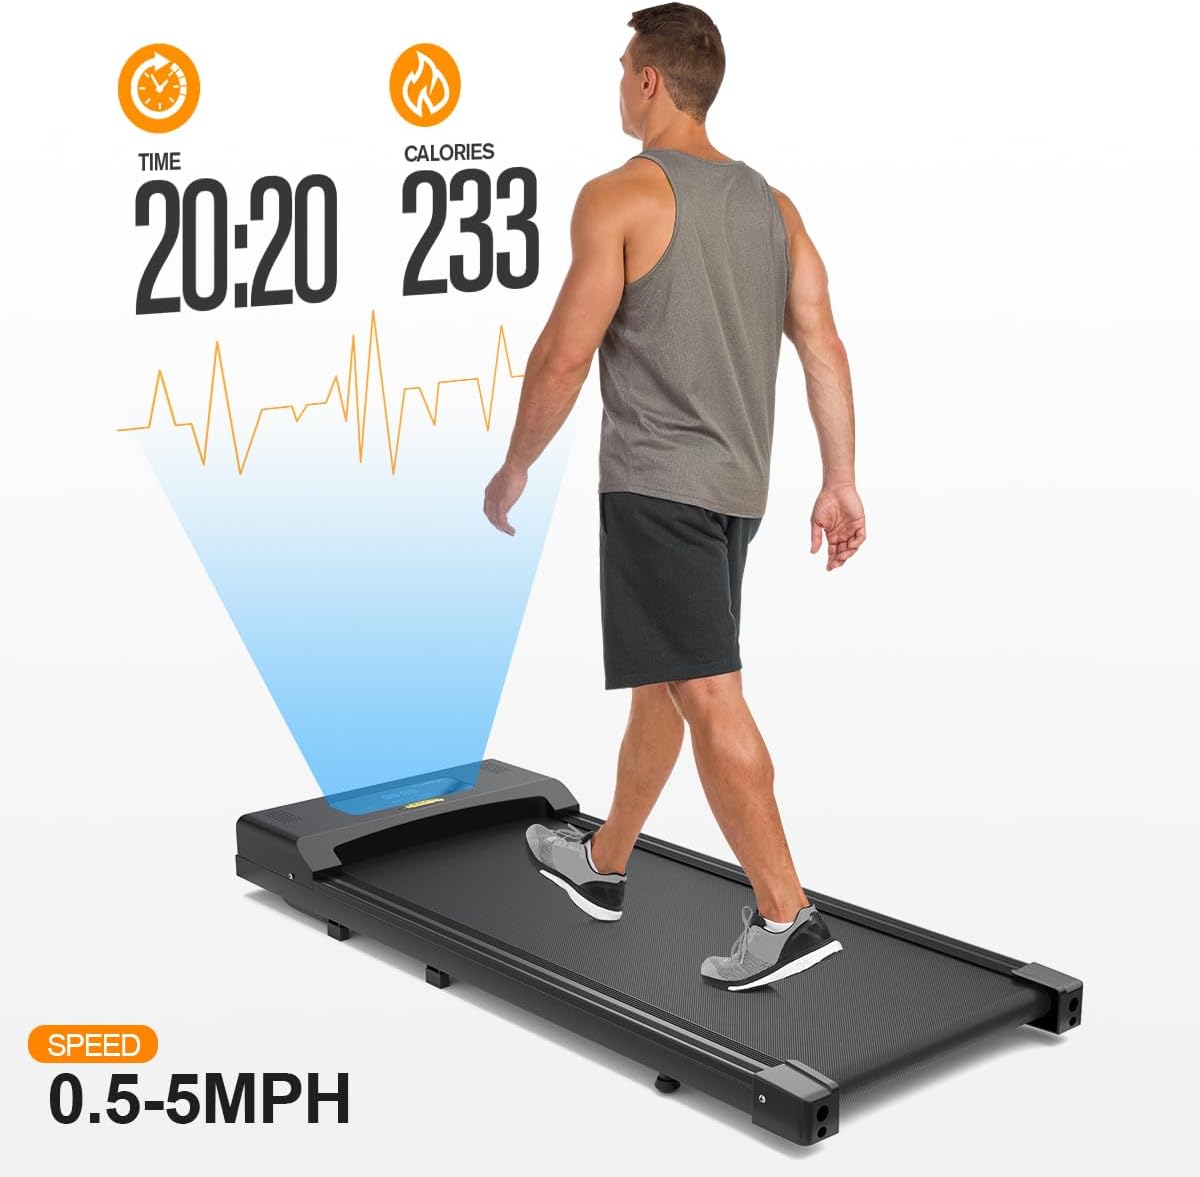 Walking Pad Under Desk Treadmill for Home Office - Walking Treadmill Portable Desk Treadmill for Walking Running - Remote, LED Display, Quiet